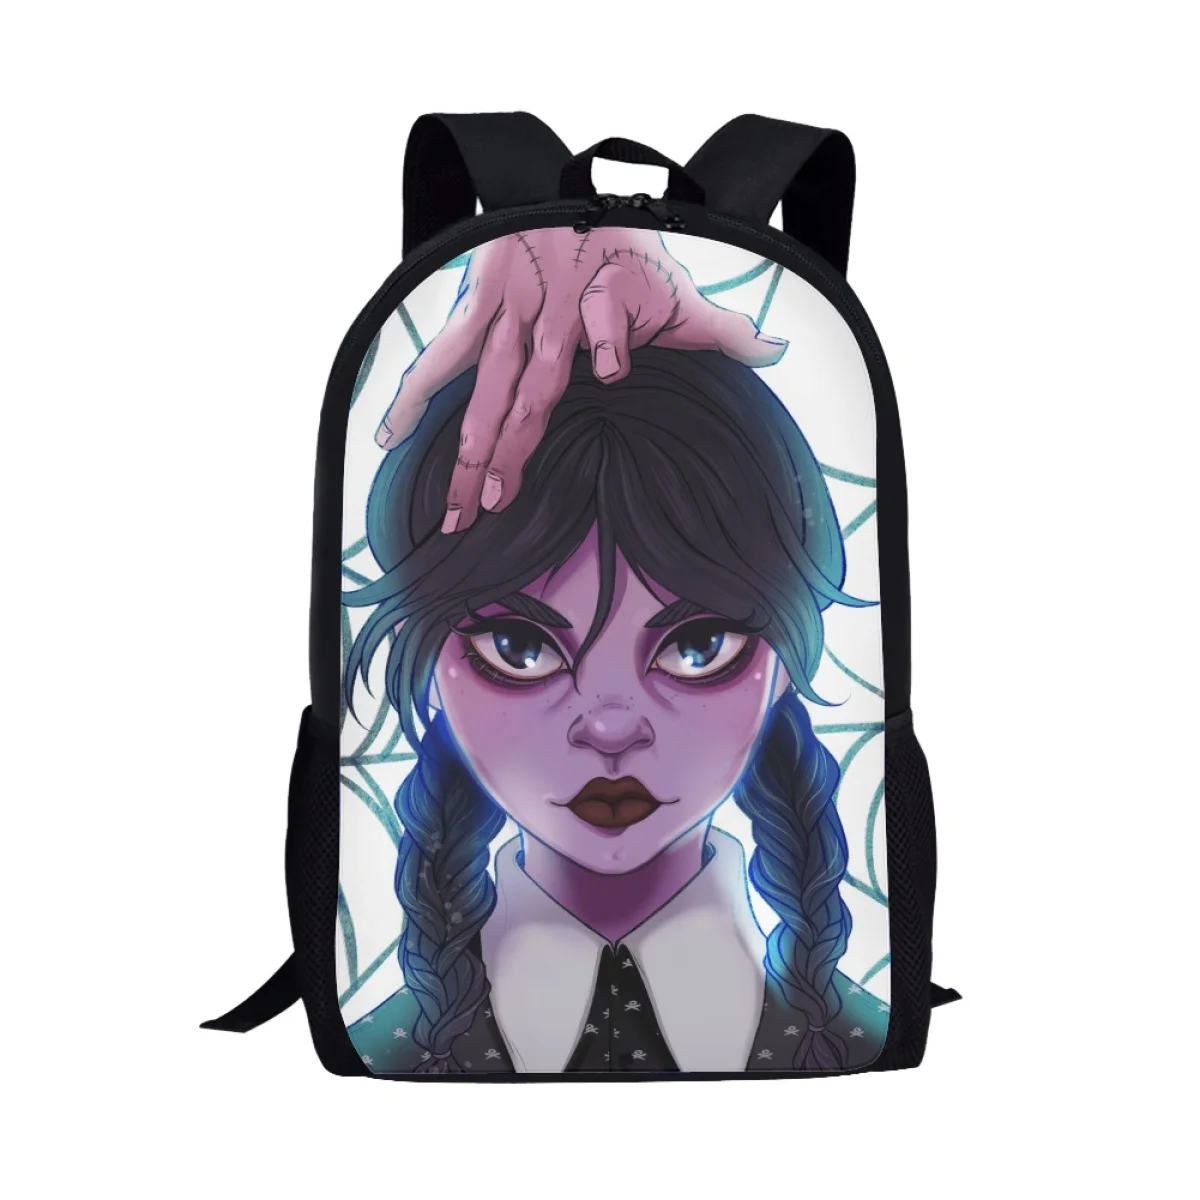 Wednesday Addams Printing School Bags For Youth Girls 17 Inch Stylish Anime Backpacks Children Students Supplies  Book Bag Gift